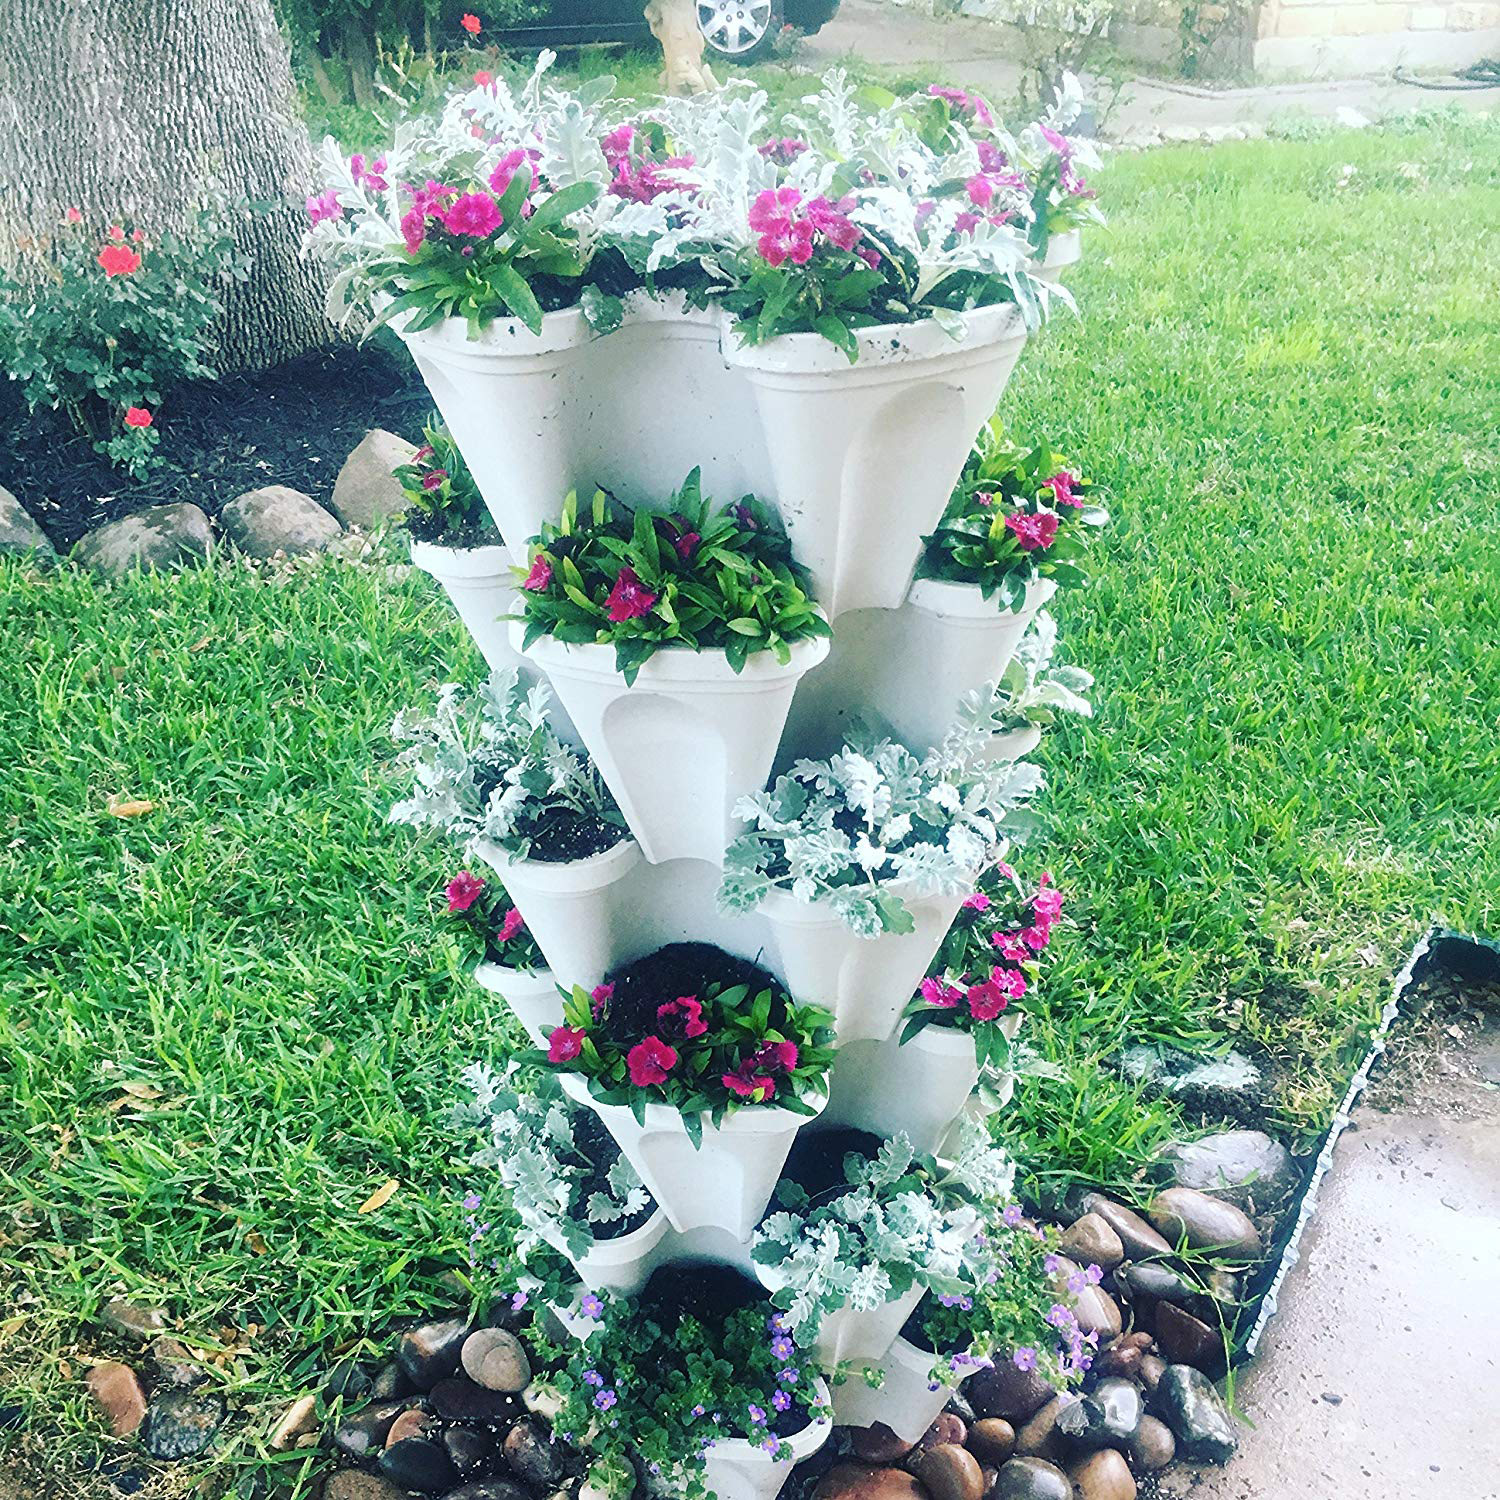 Used for Strawberries Herbs Peppers Flowers and Succulents Stacking Garden Pots Coadura Stackable Planter 5 Tier Vertical Planters for Outdoor Plants